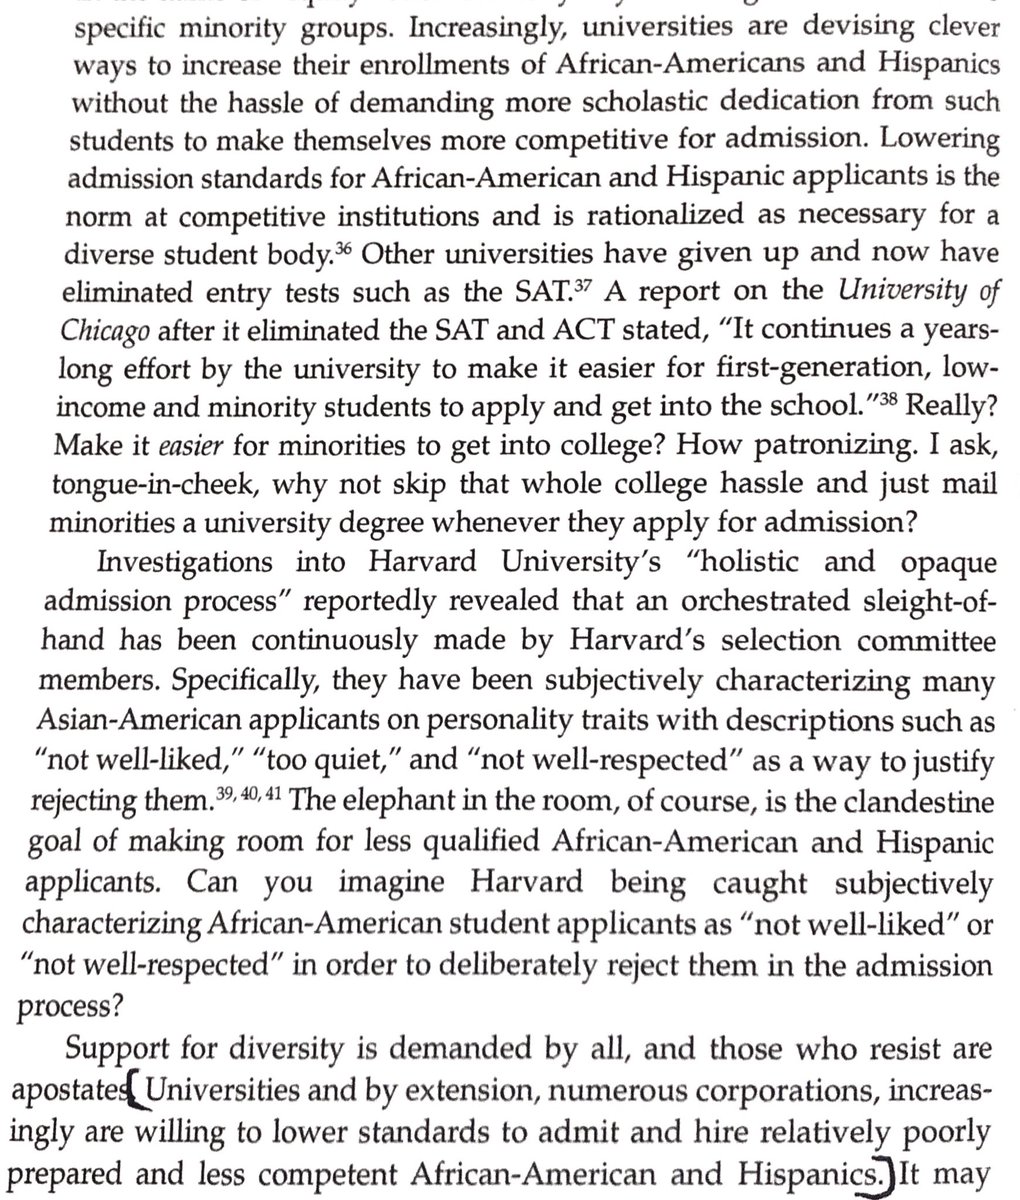 Negy consistently tweets & writes about the SAT/ACT in his book (pg 26 & 96) belittling Hispanics and African Americans calling them “less qualified”, “less capable”, and “less competent” than Whites + Asian Americans while saying college’s “should just mail minorities a degree”